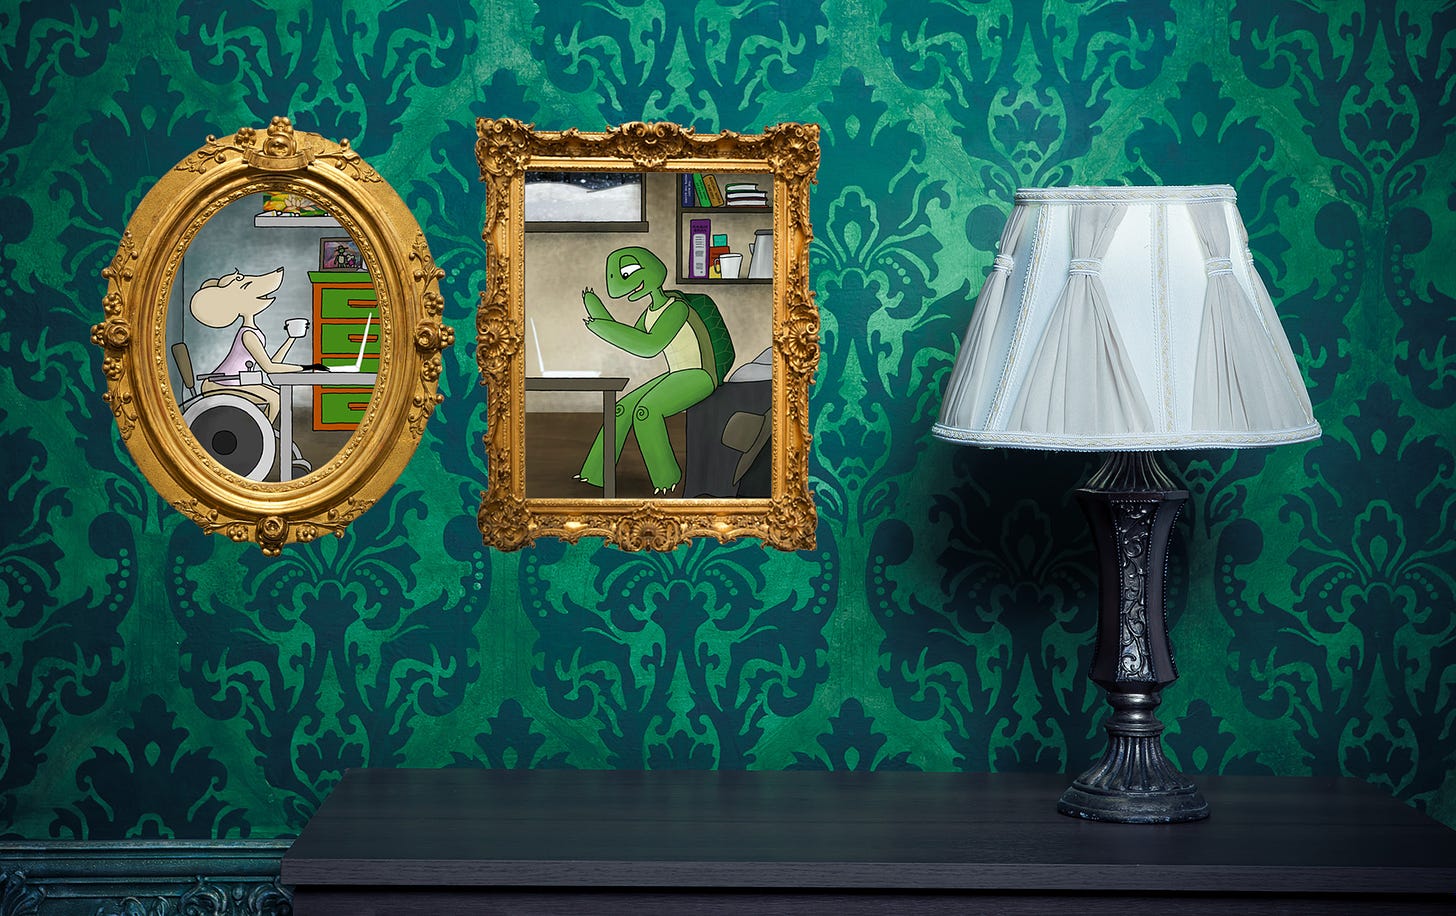 Two framed portraits of a cartoon mouse in one room and a cartoon tortoise in another room conversing together on their laptops. The tortoise, Horace, is articulating with his hands and the mouse, Abigail, has her head thrown back with laughter. The frames are ornate gold and hang against vintage teal wallpaper above a black dresser with a table lamp.